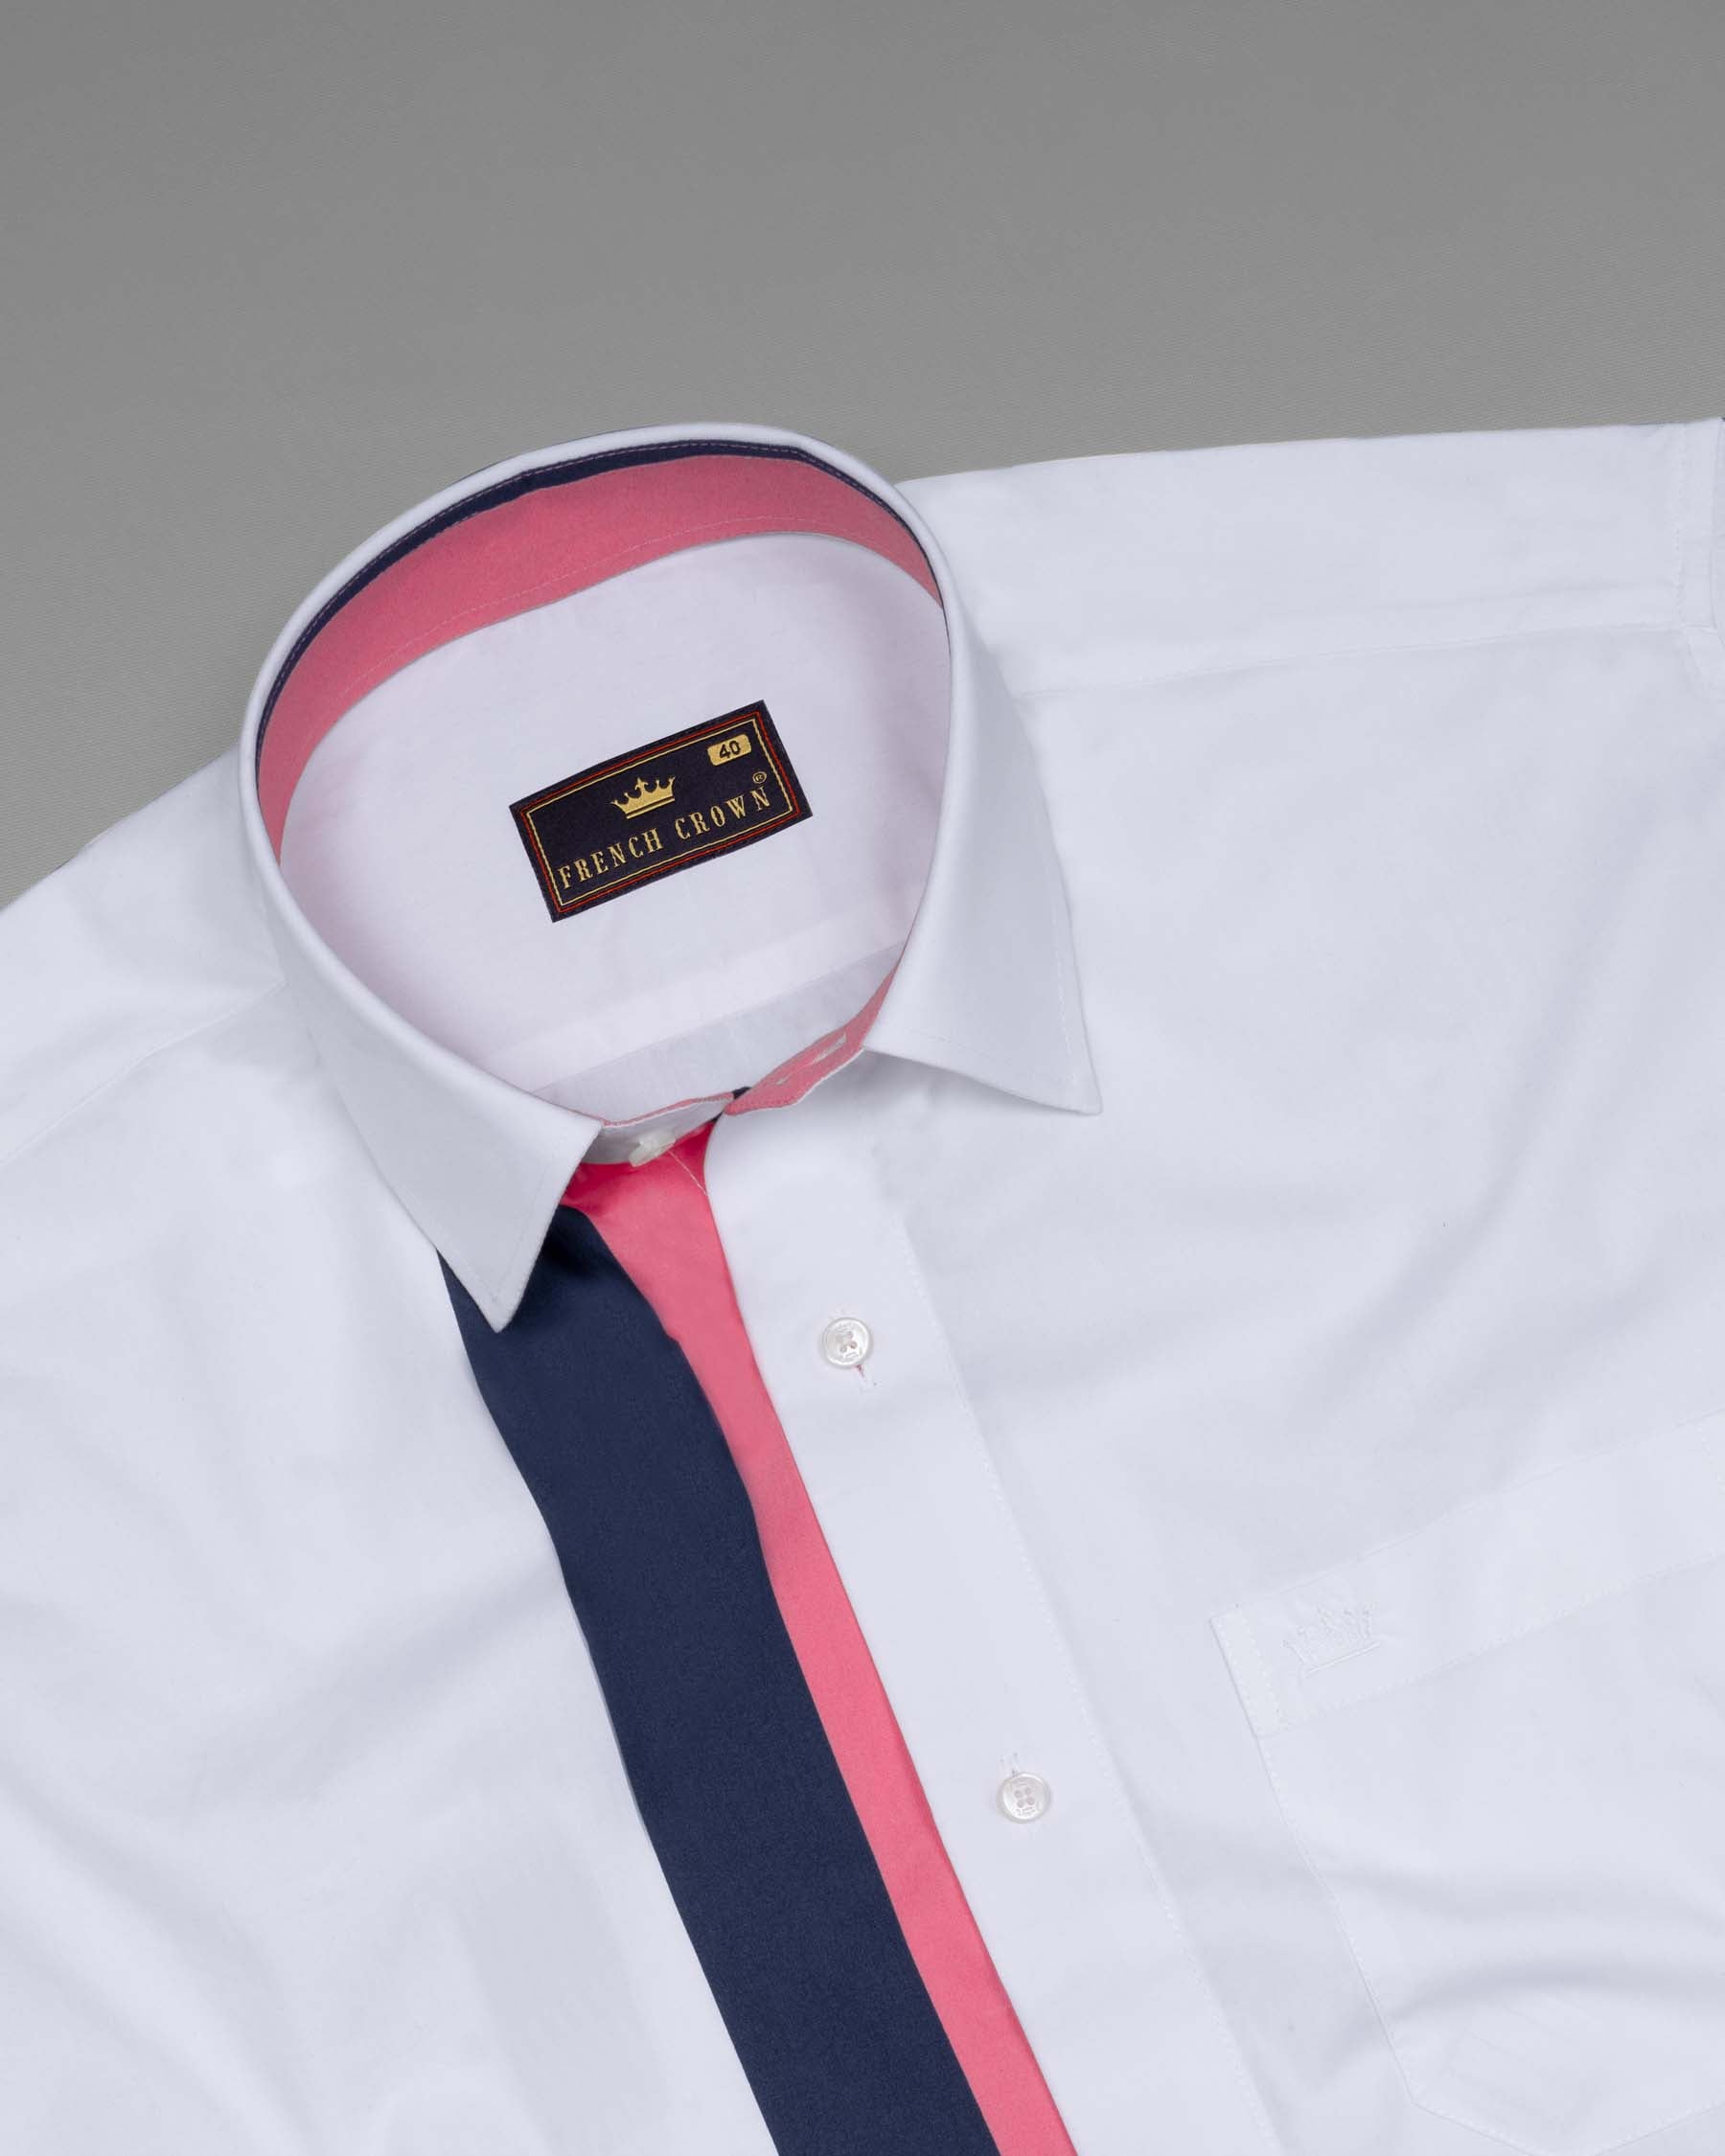 Bright White with Big Stone and Deep Blush Premium Cotton Shirt 5883-2CP-38, 5883-2CP-H-38, 5883-2CP-39, 5883-2CP-H-39, 5883-2CP-40, 5883-2CP-H-40, 5883-2CP-42, 5883-2CP-H-42, 5883-2CP-44, 5883-2CP-H-44, 5883-2CP-46, 5883-2CP-H-46, 5883-2CP-48, 5883-2CP-H-48, 5883-2CP-50, 5883-2CP-H-50, 5883-2CP-52, 5883-2CP-H-52